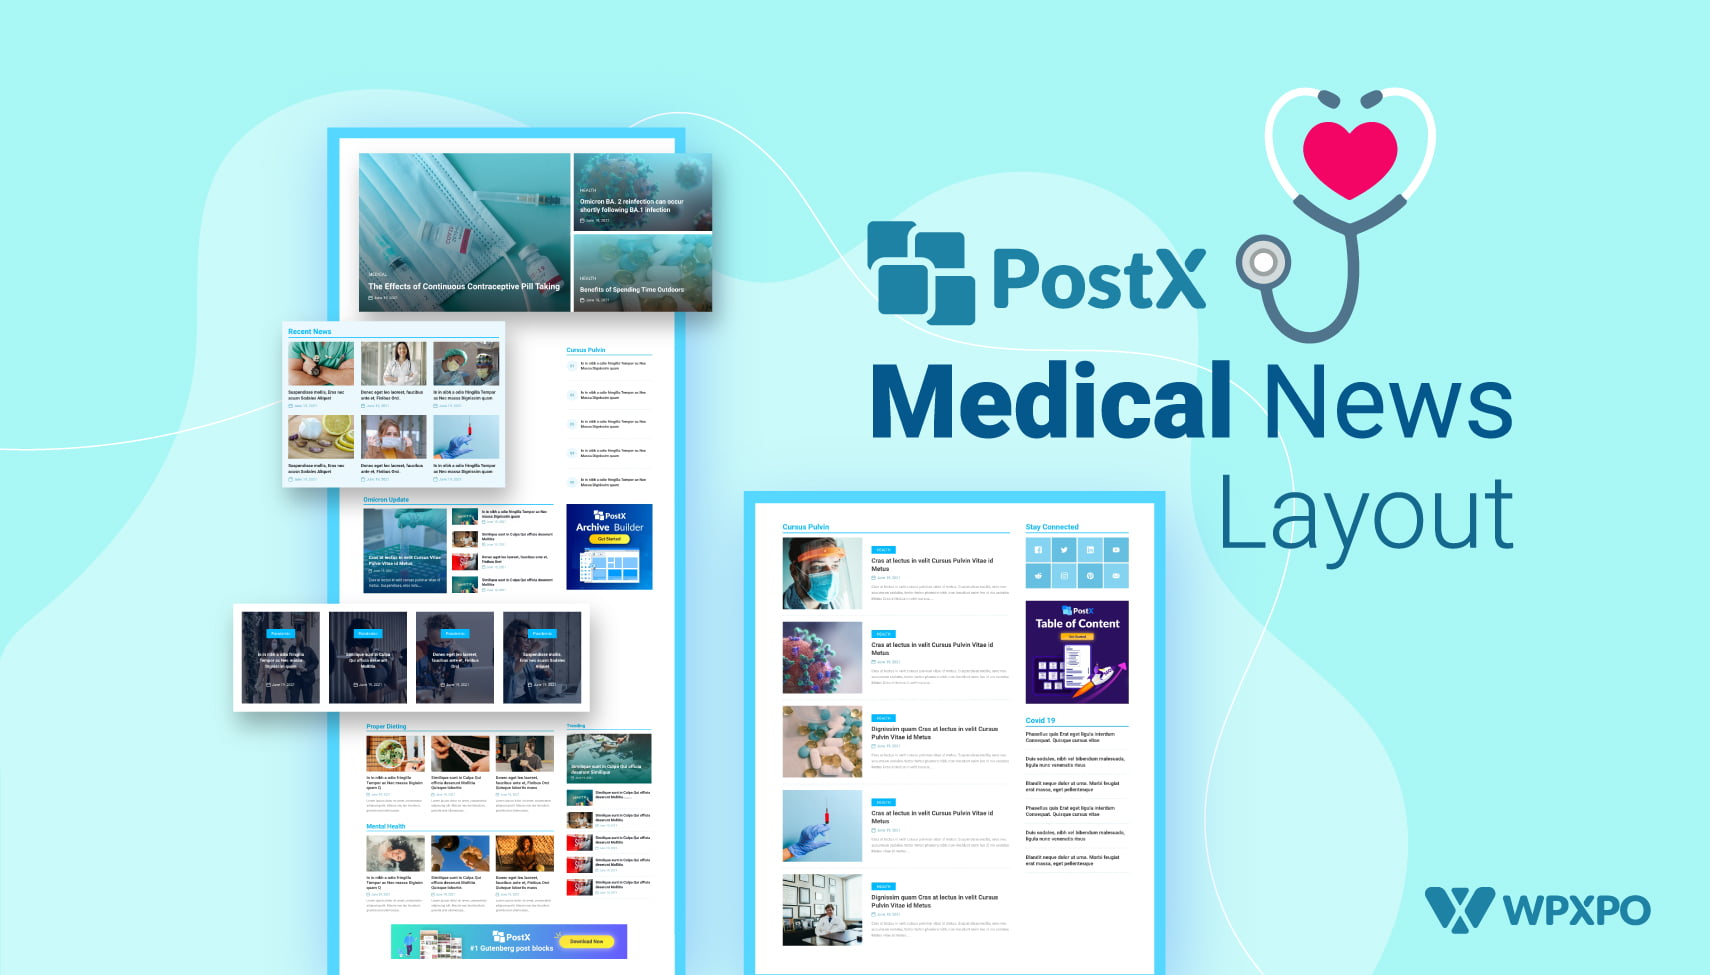 The Latest Health News Template for PostX